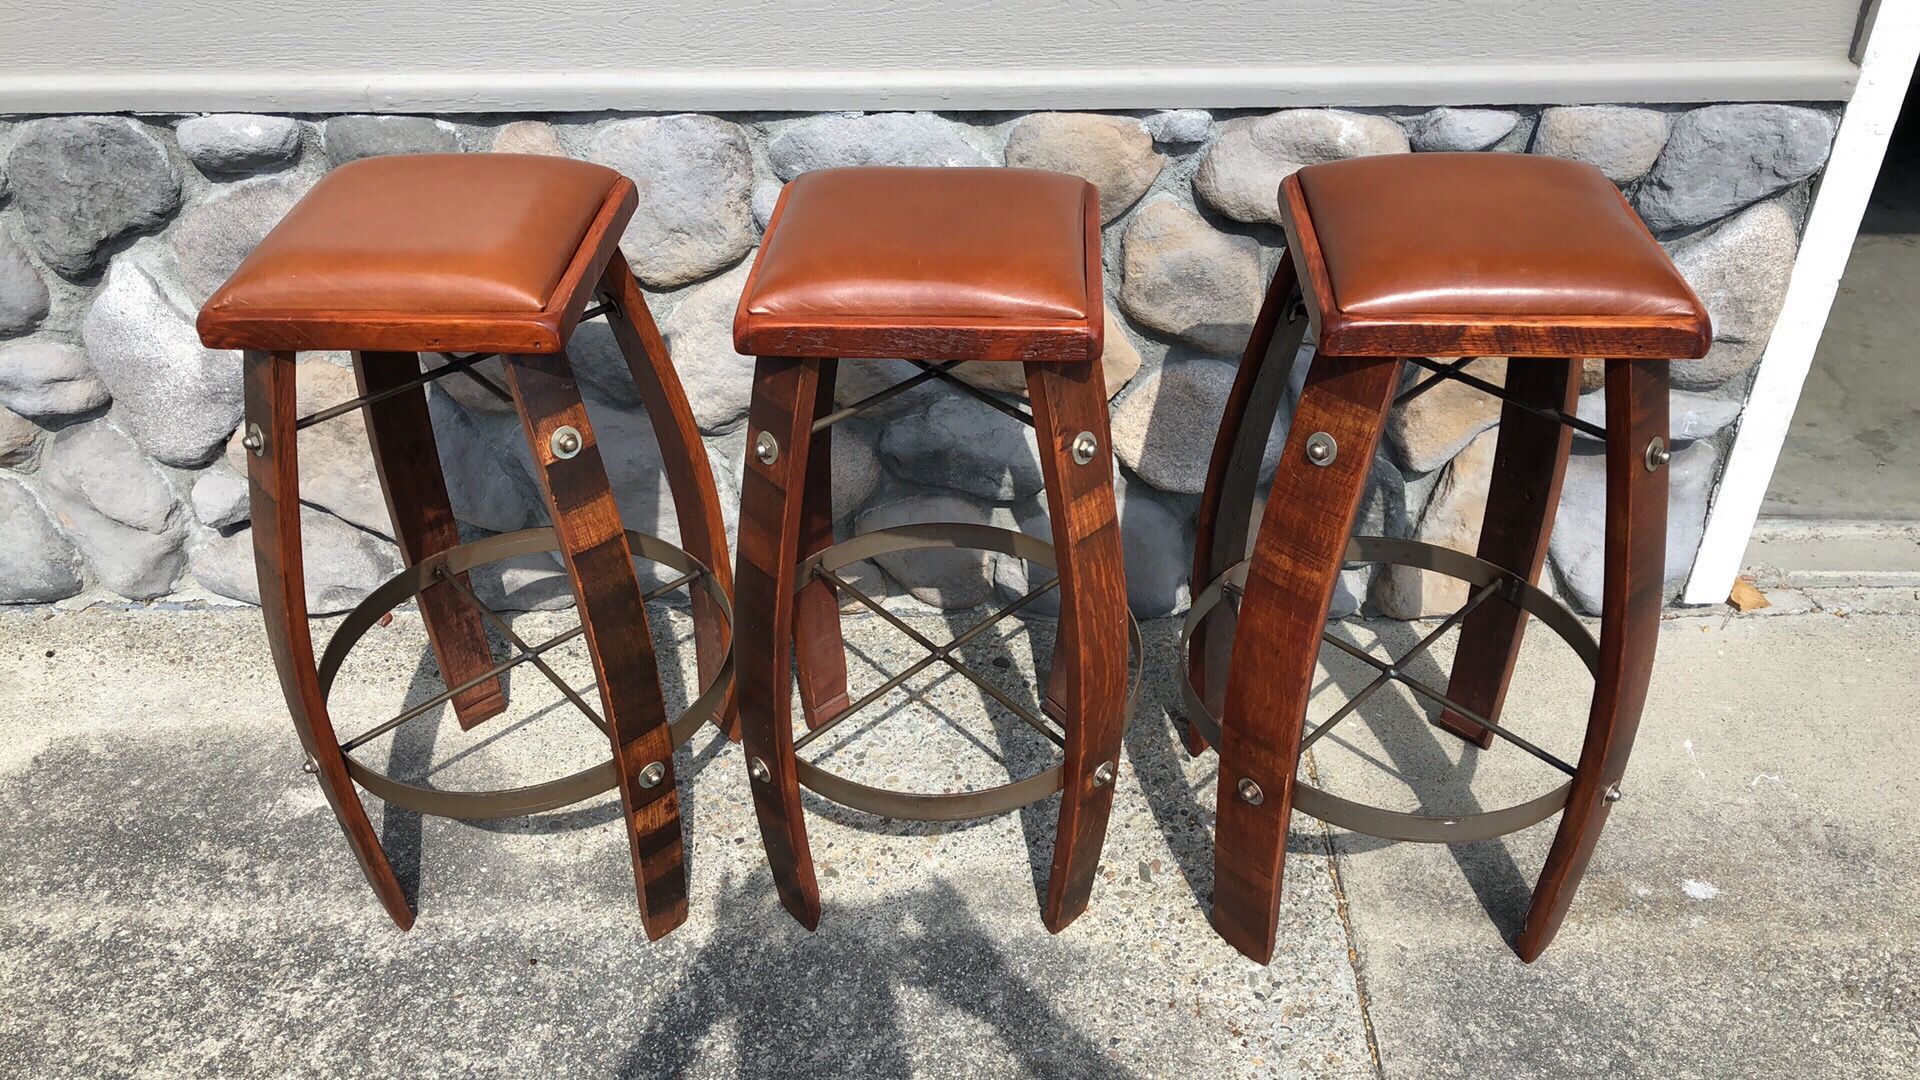 Real wine barrel bar stools with leather seat (3)